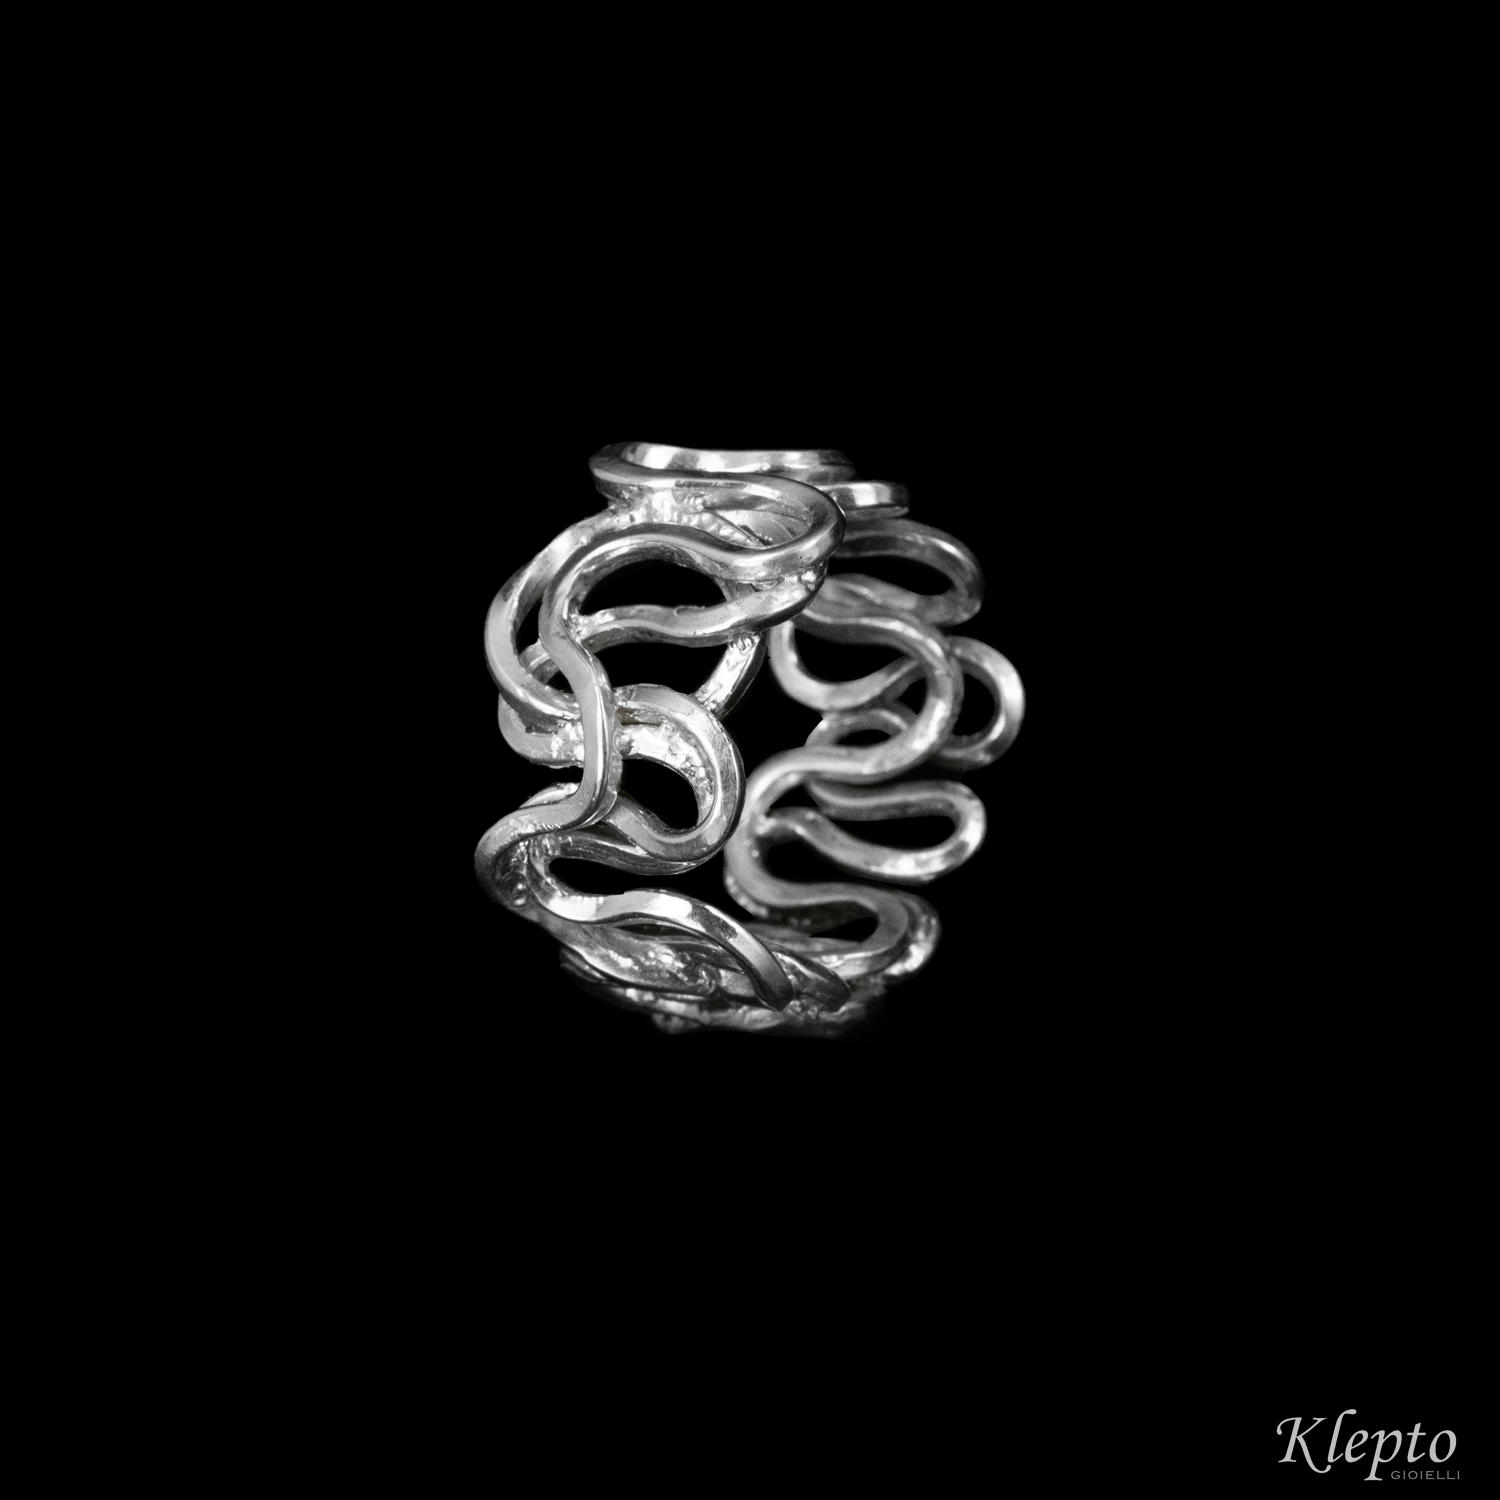 Silnova silver ring with braided wire (band)